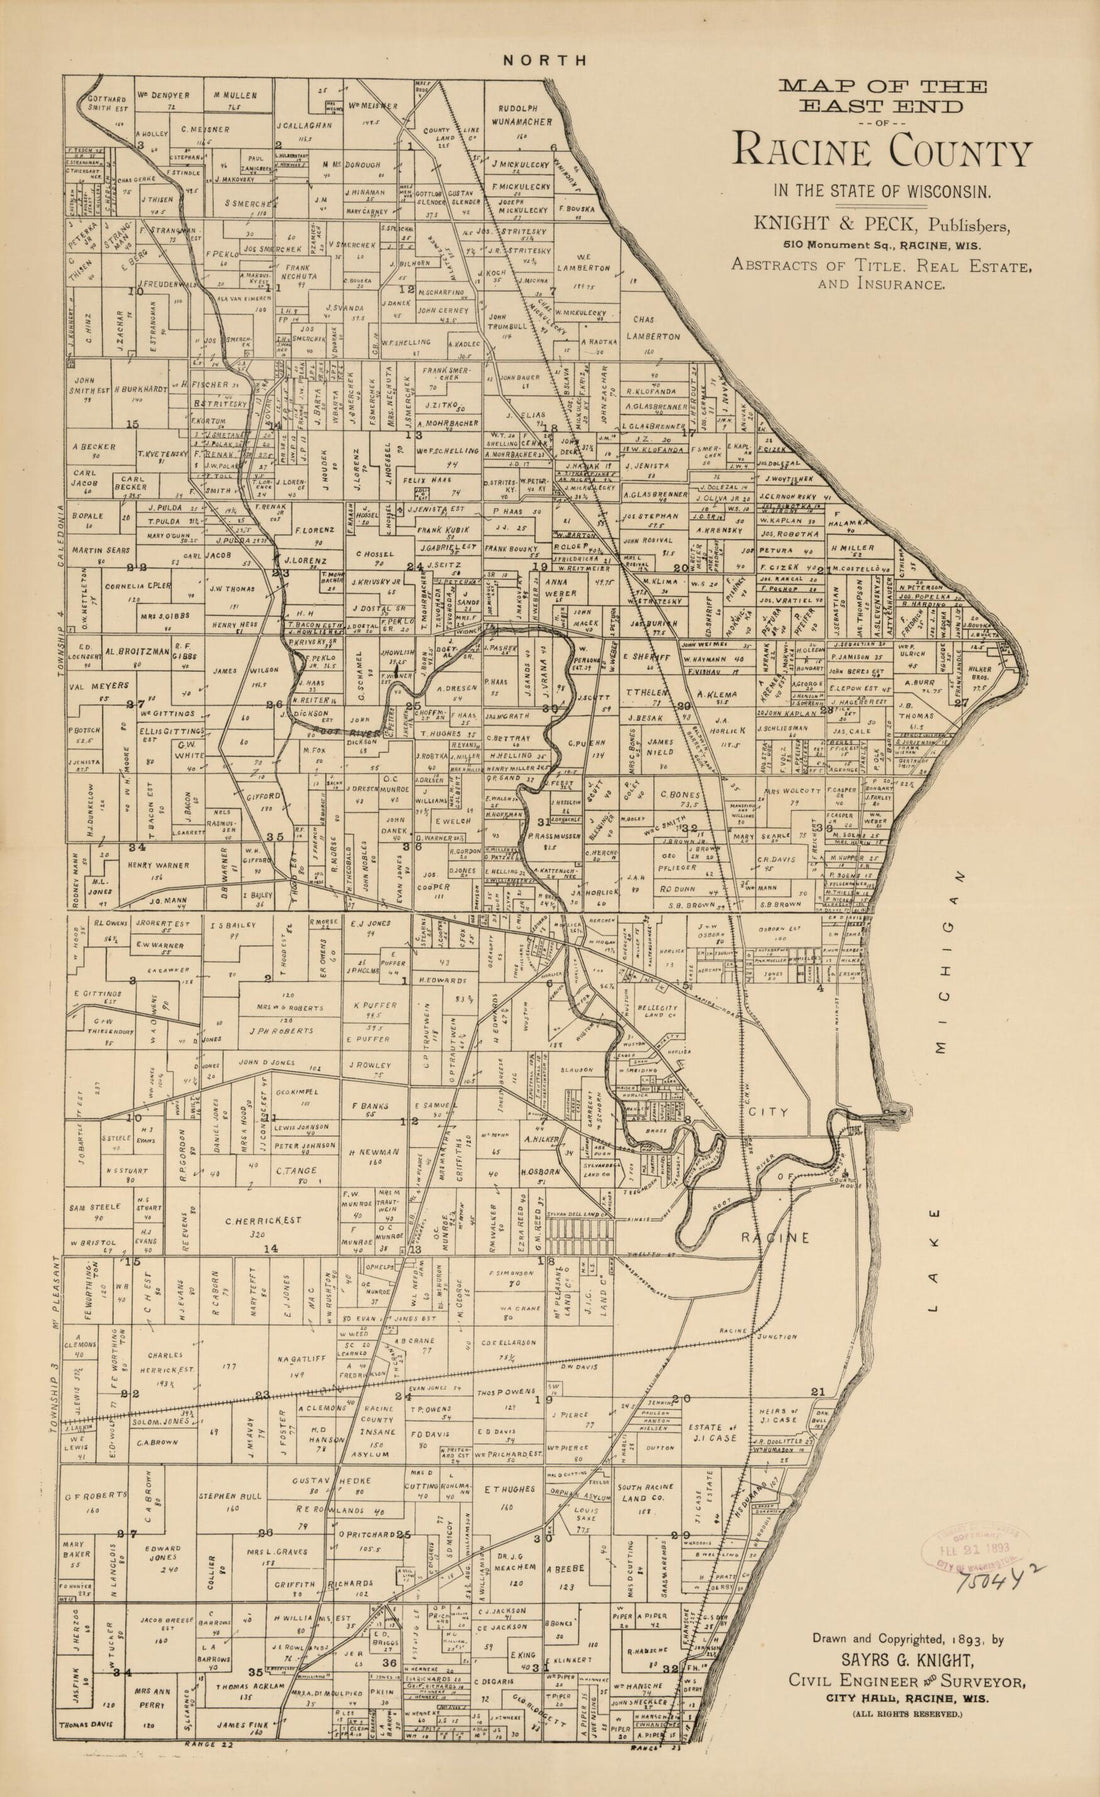 This old map of Map of the East End of Racine County In the State of Wisconsin from 1893 was created by Sayrs G. Knight in 1893